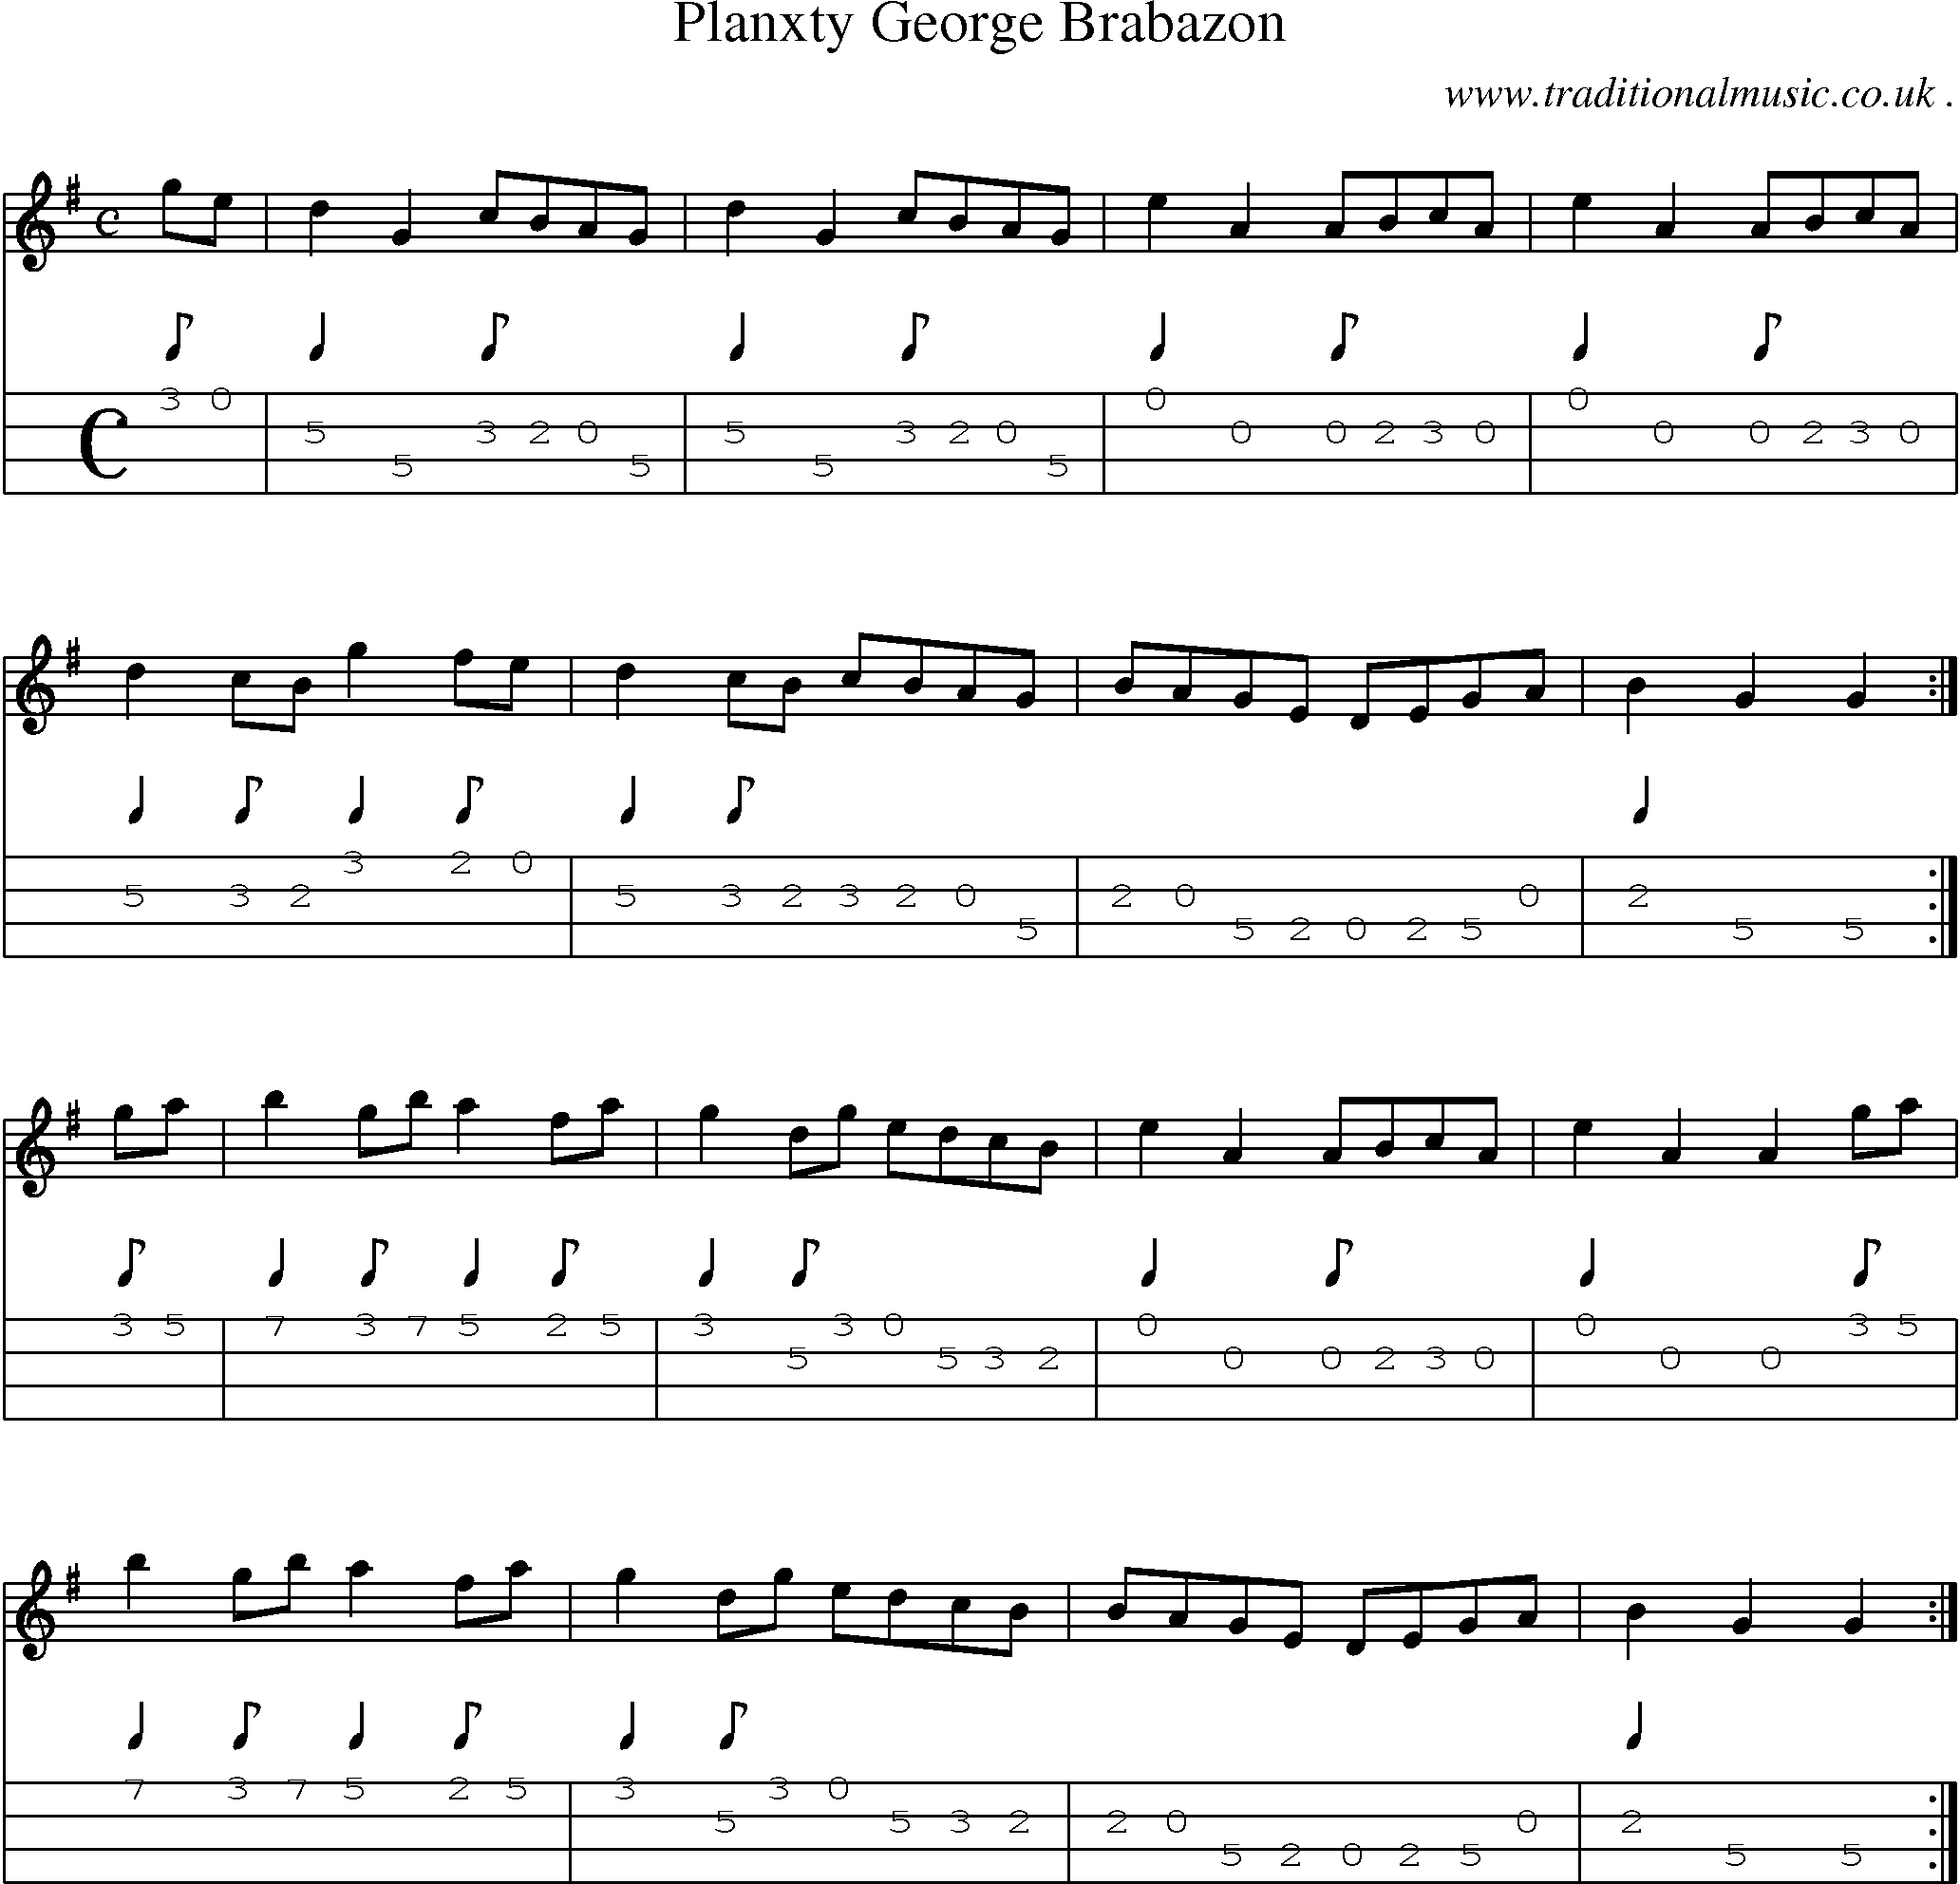 Sheet-Music and Mandolin Tabs for Planxty George Brabazon